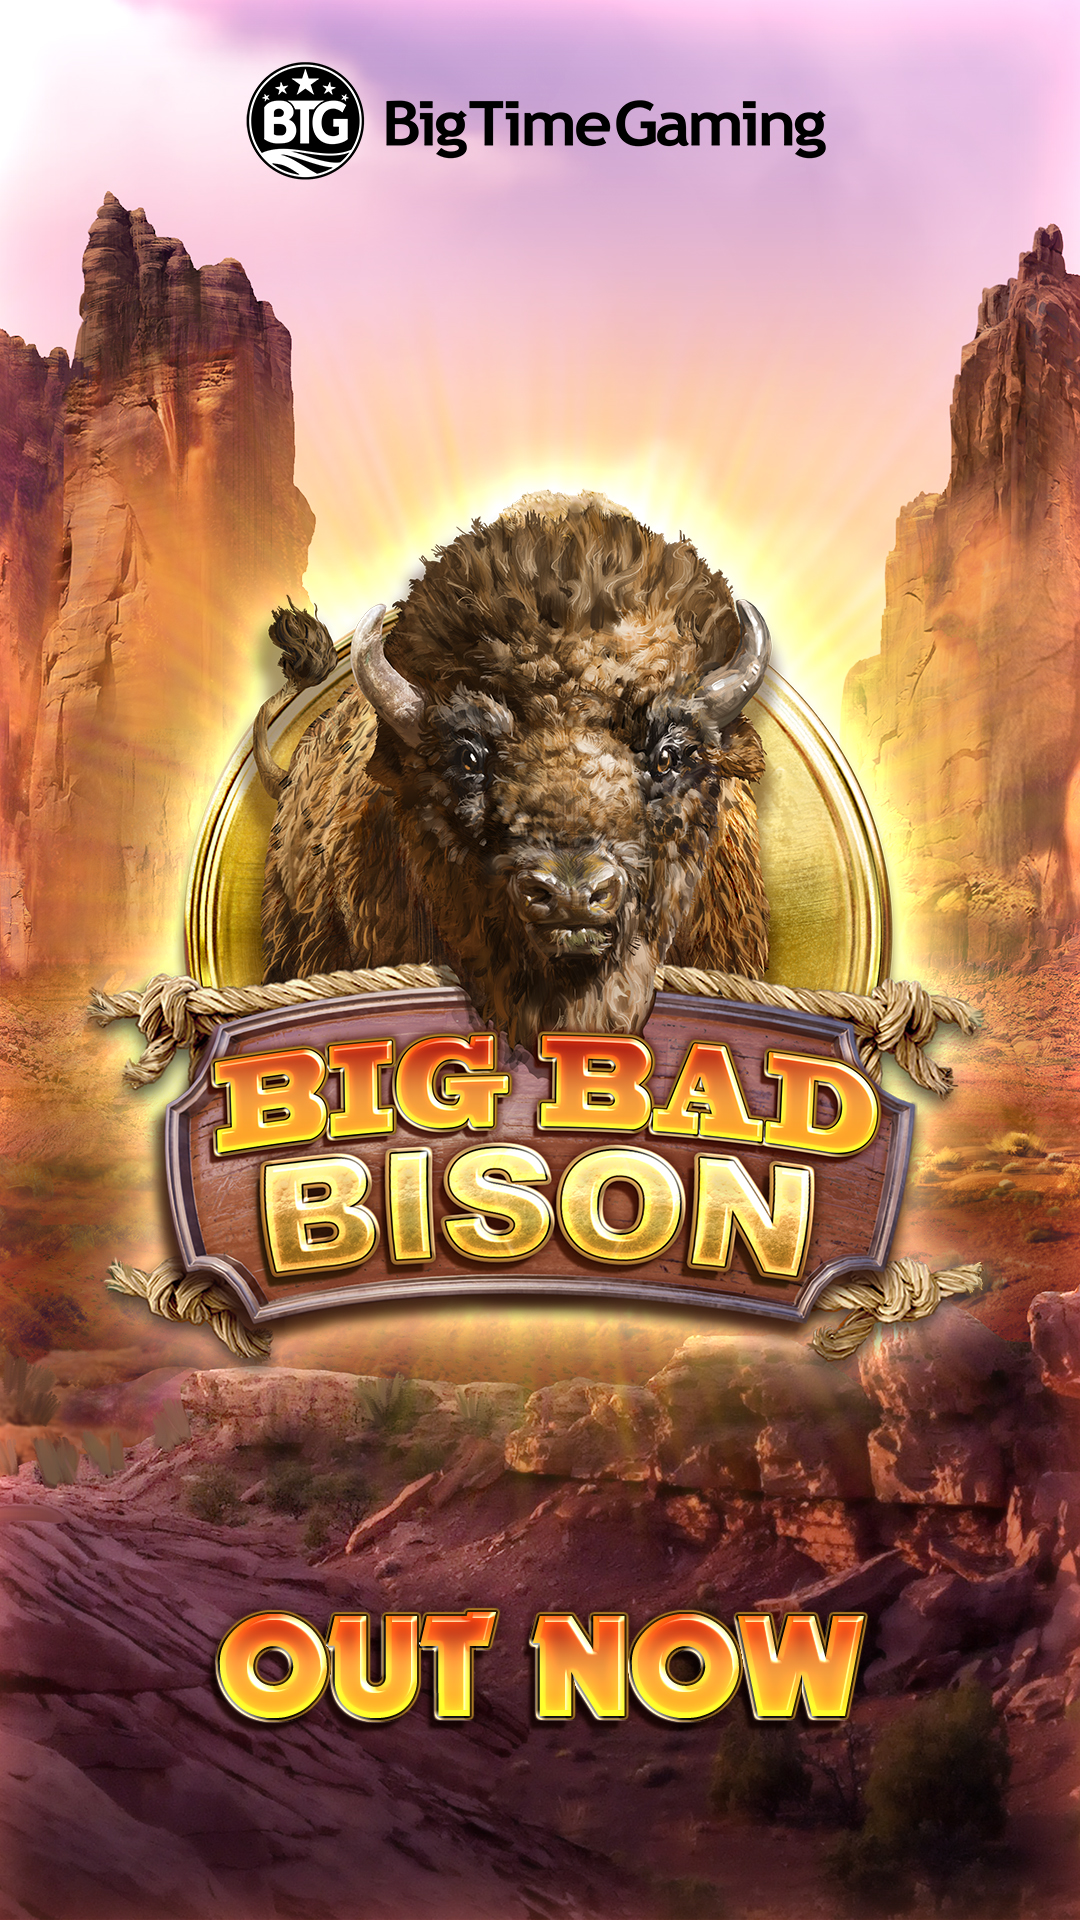 big_bad_bison_instagram_story_out_now_1080x1920.jpg thumbnail